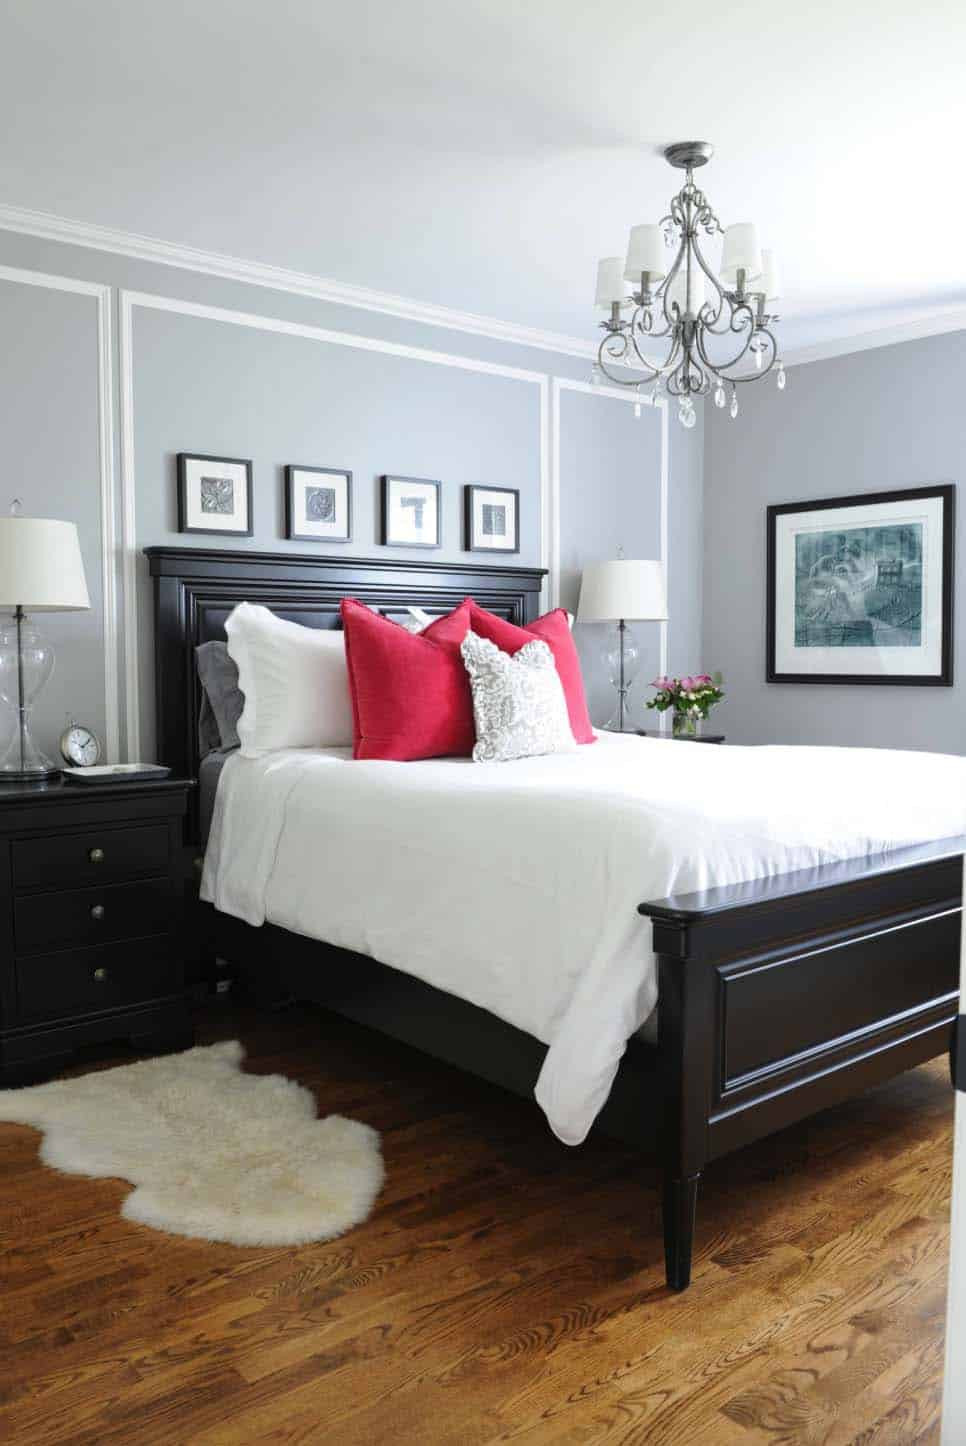 Master Bedroom Paint Color Ideas
 25 Absolutely stunning master bedroom color scheme ideas